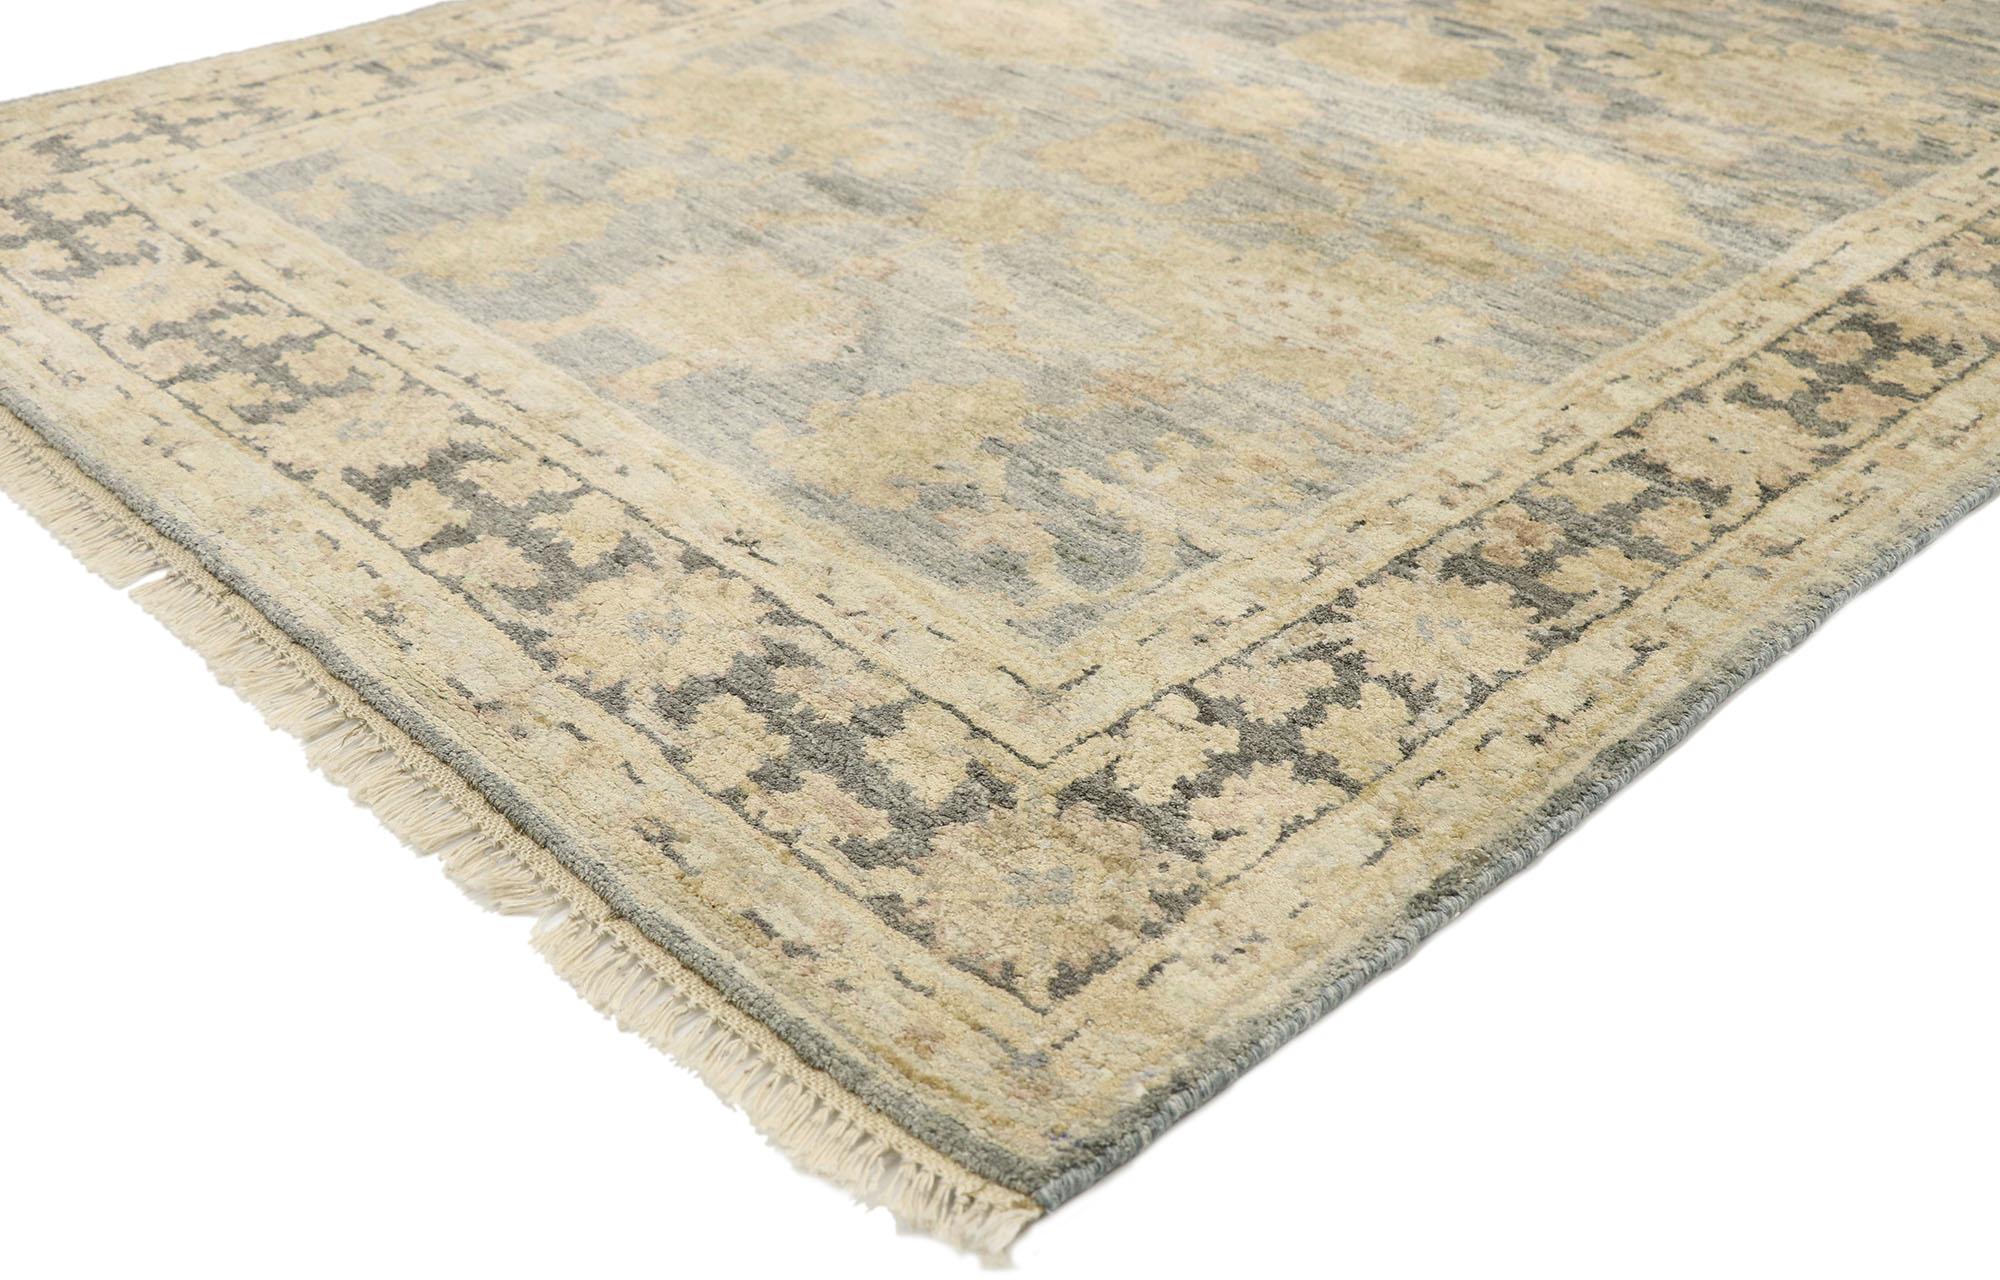 30366 New Contemporary Oushak wool and silk rug with Transitional style. This hand knotted wool and silk Oushak accent rug features an all-over botanical pattern composed of large, lush palmettes in a shah abba style connected by an angular lattice